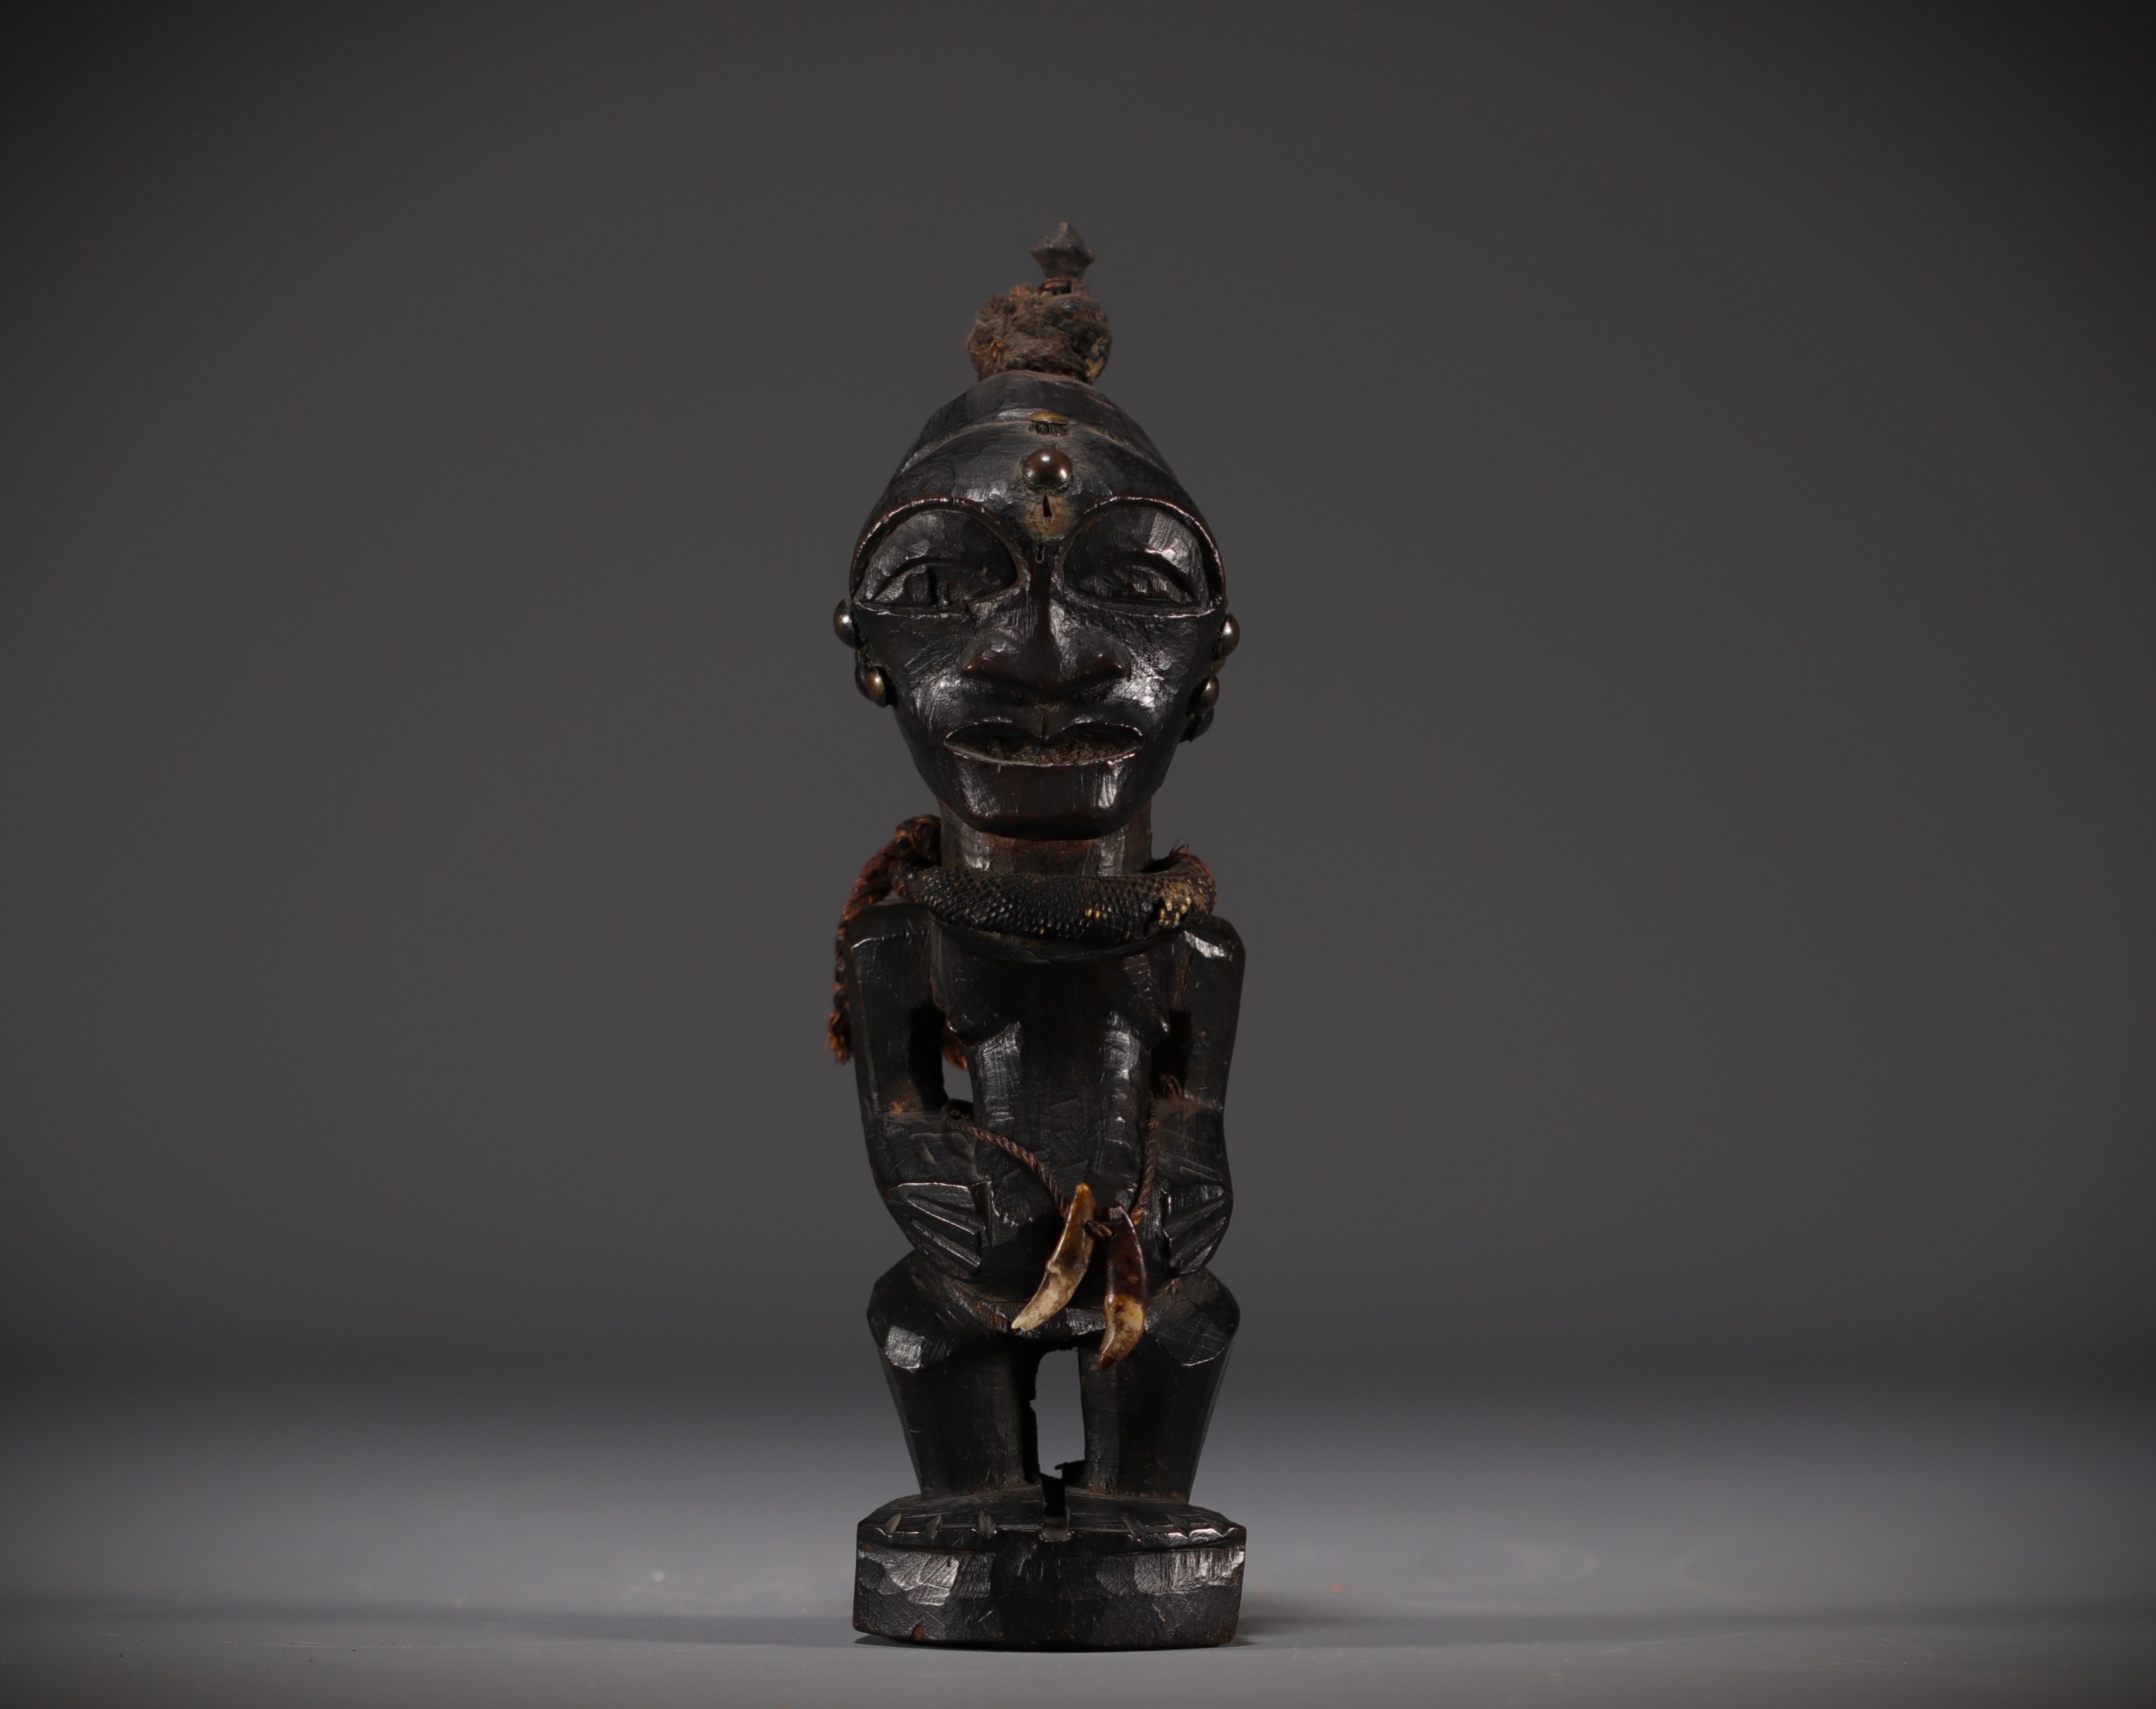 SONGYE ritual figure - collected around 1900 - Rep.Dem.Congo - Image 2 of 7